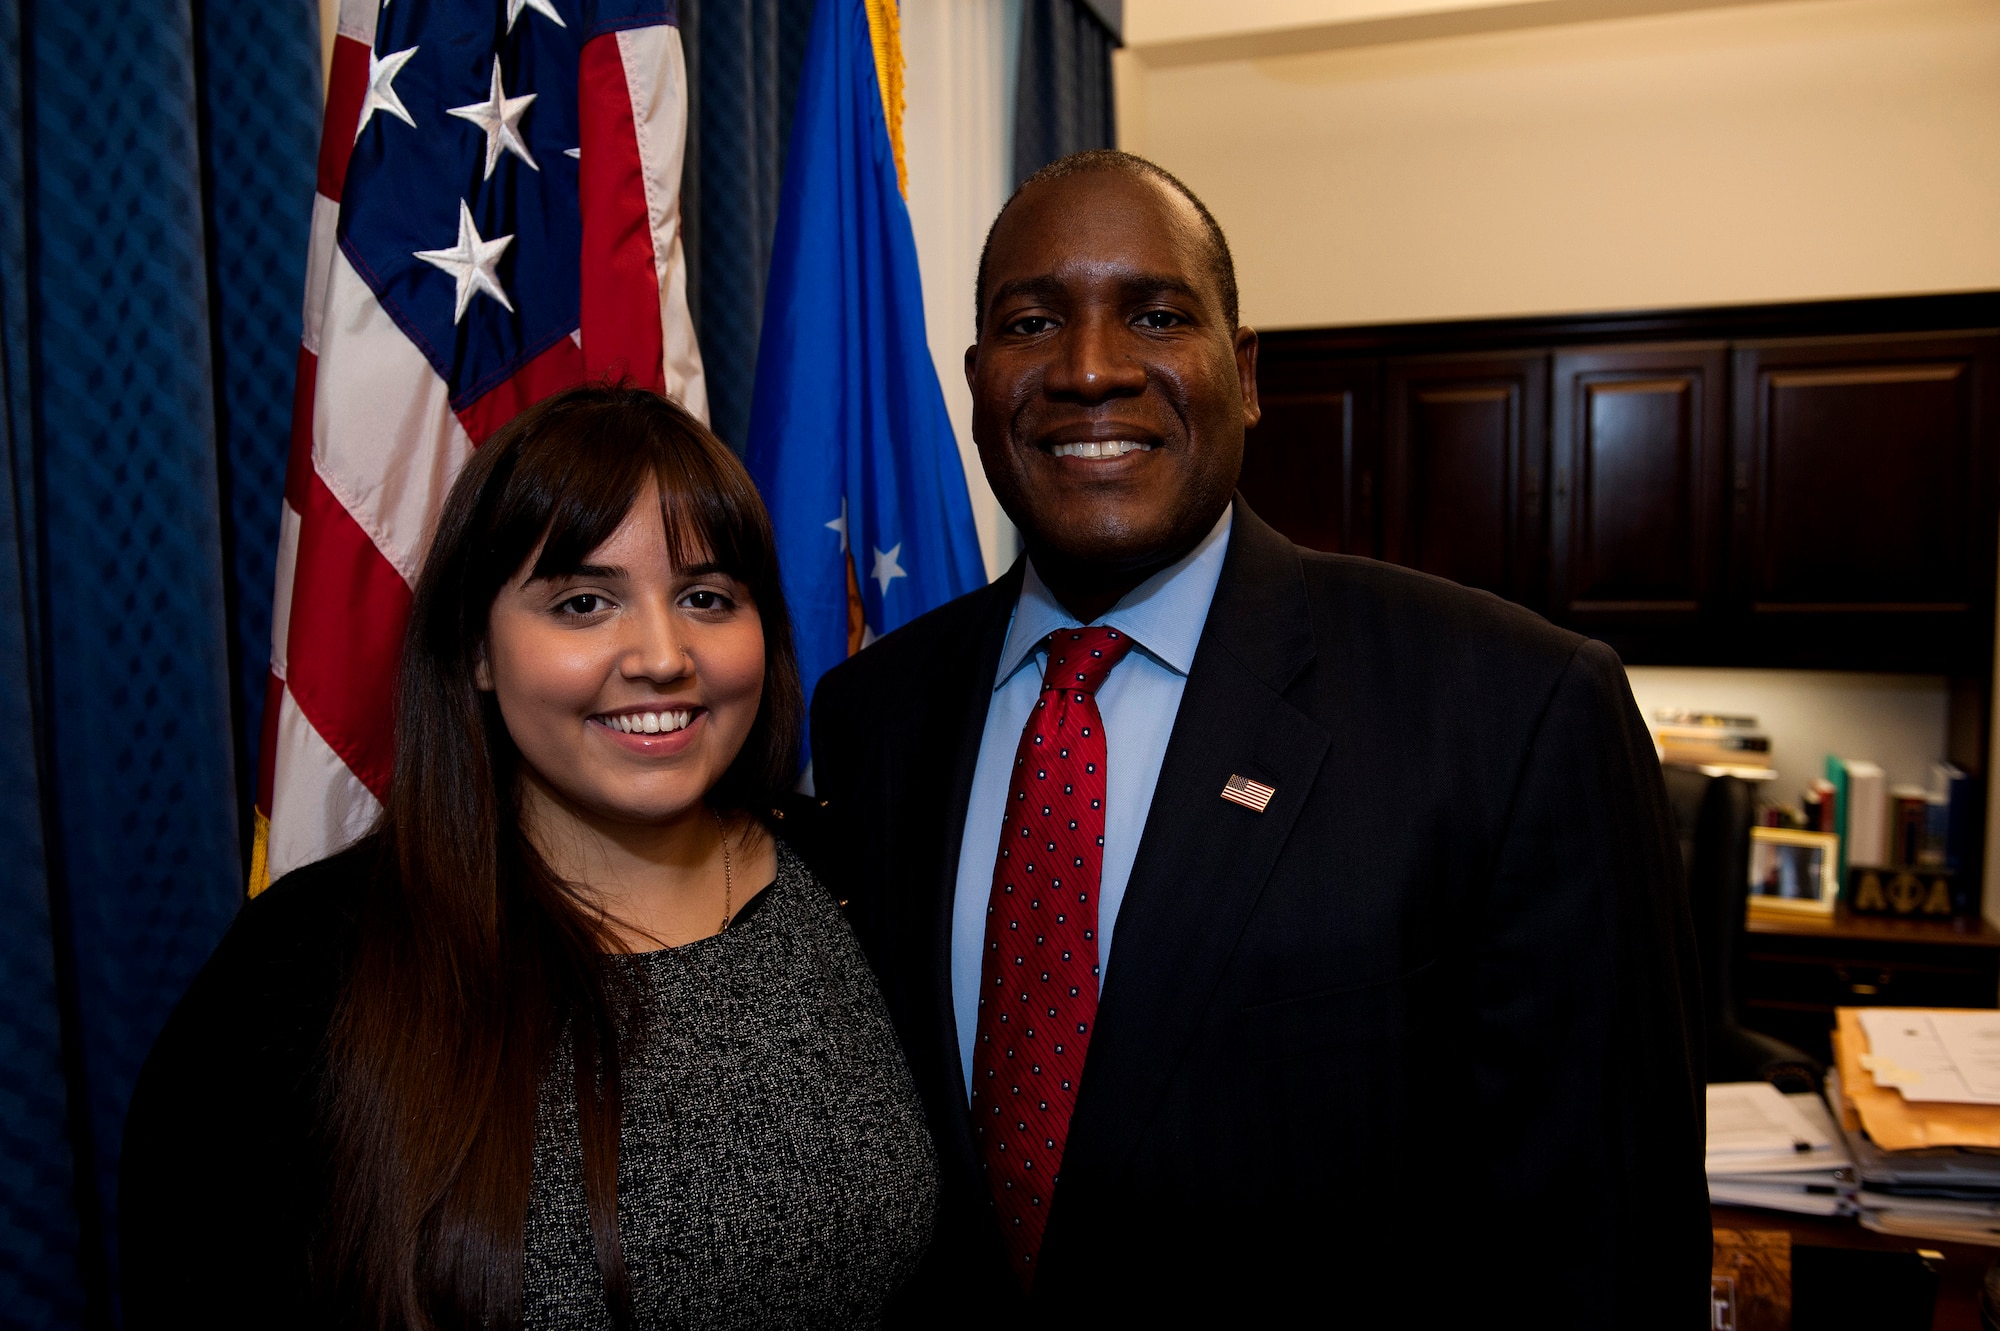 Air Force intern Natalie Labayen poses with her supervisor, Dr. Jarris Taylor, who's the Deputy Assistant Secretary of teh Air Force for the Strategic Diversity Integration office, Sept. 13, 2013 in the Pentagon.  Labayen recently won a Department of Defense award for her significant contributions in the Air Force Strategic Diversity Integration Office. Labayen, who has an autoimmune disease, won the Judith C. Gilliom Award, presented by the Workforce Recruitment Program Award Ceremony Aug 2. 